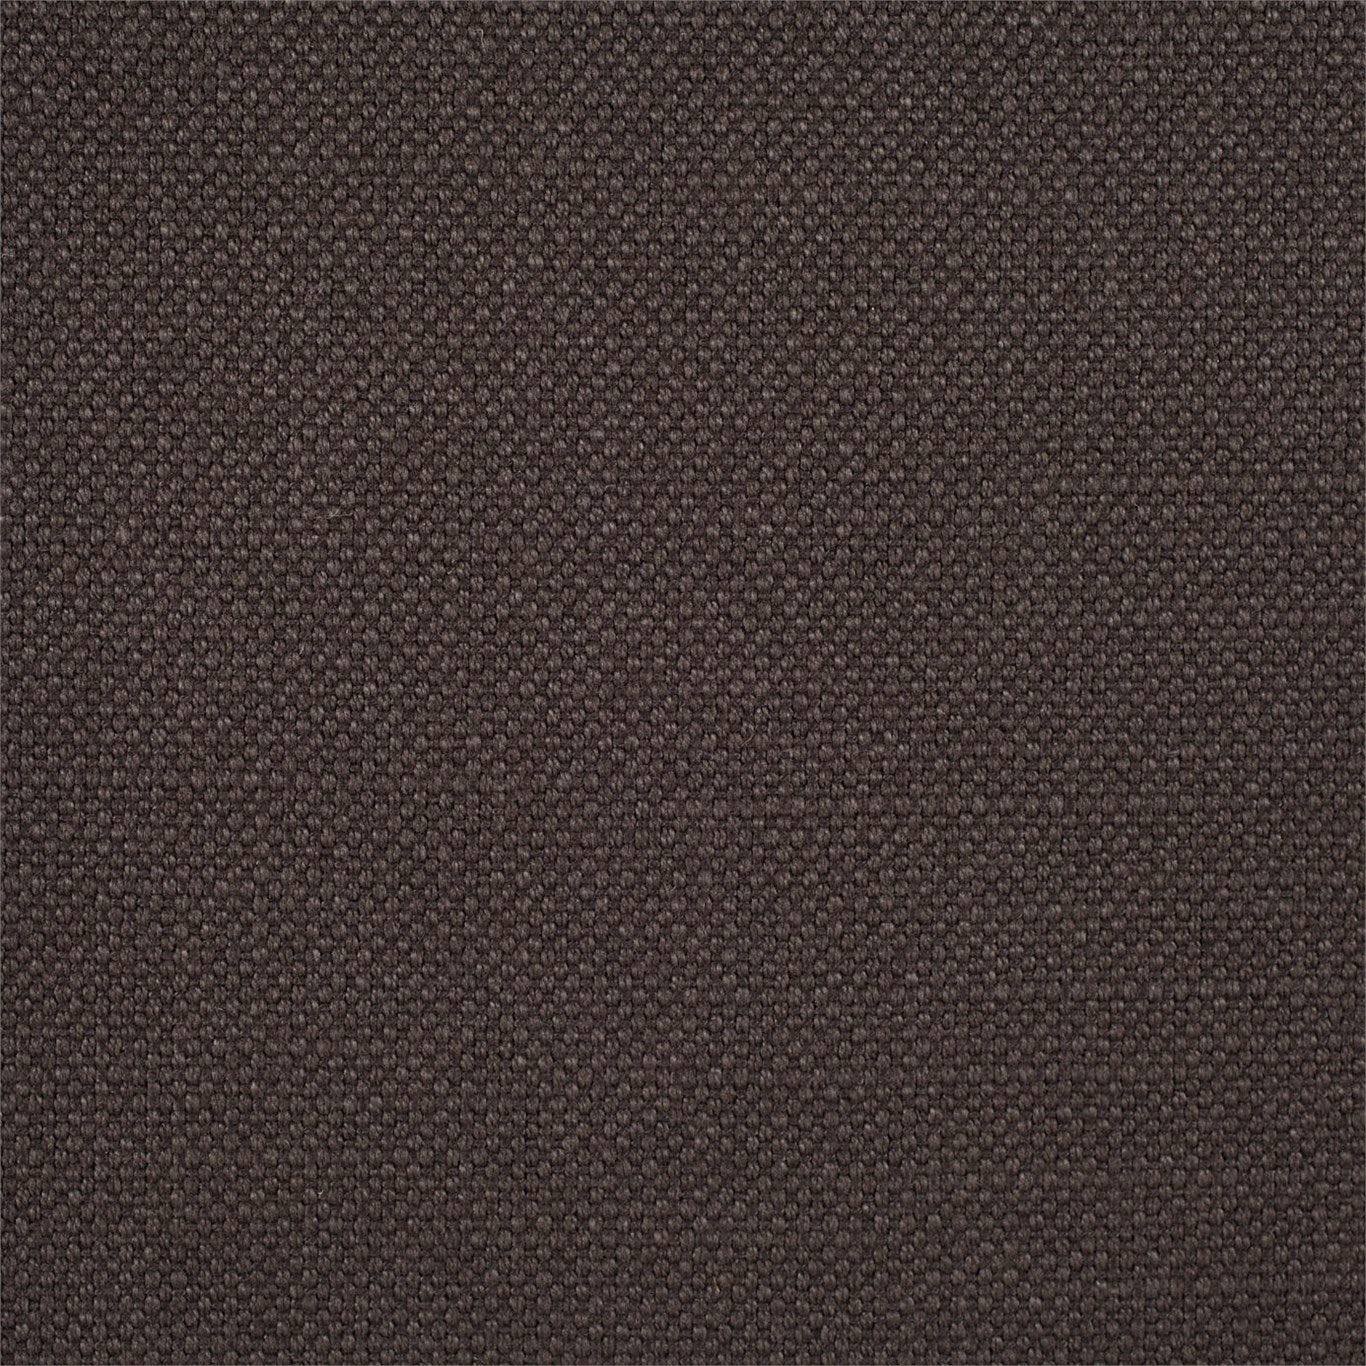 Arley Fabric by Sanderson - DALY245829 - Graphite